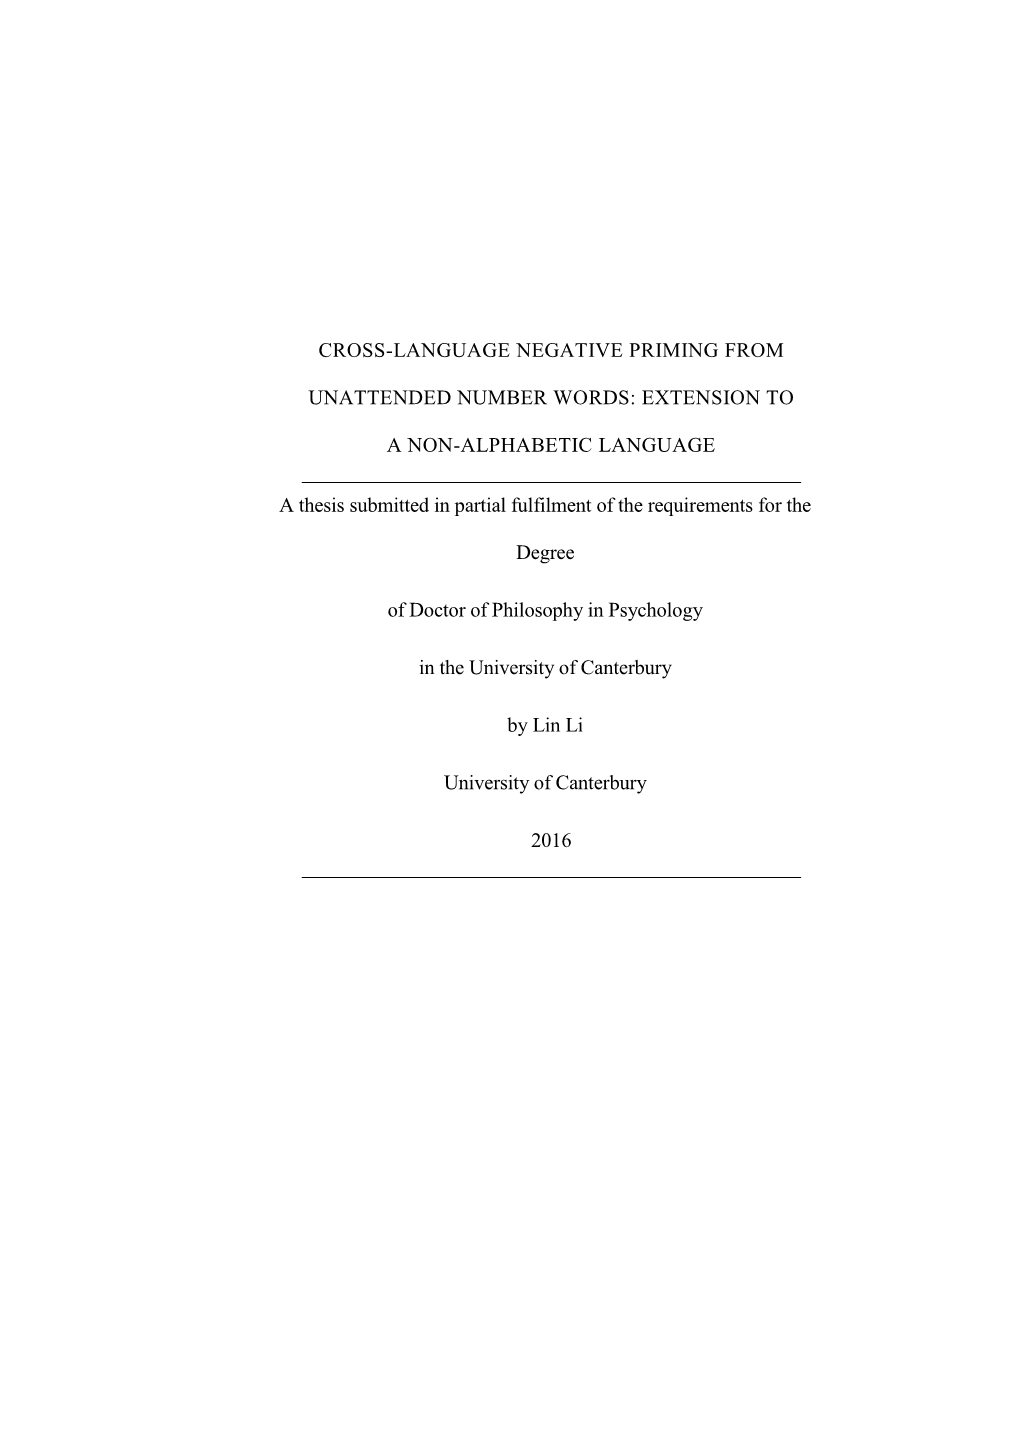 CROSS-LANGUAGE NEGATIVE PRIMING from UNATTENDED NUMBER WORDS: EXTENSION to a NON-ALPHABETIC LANGUAGE a Thesis Submitted in Parti